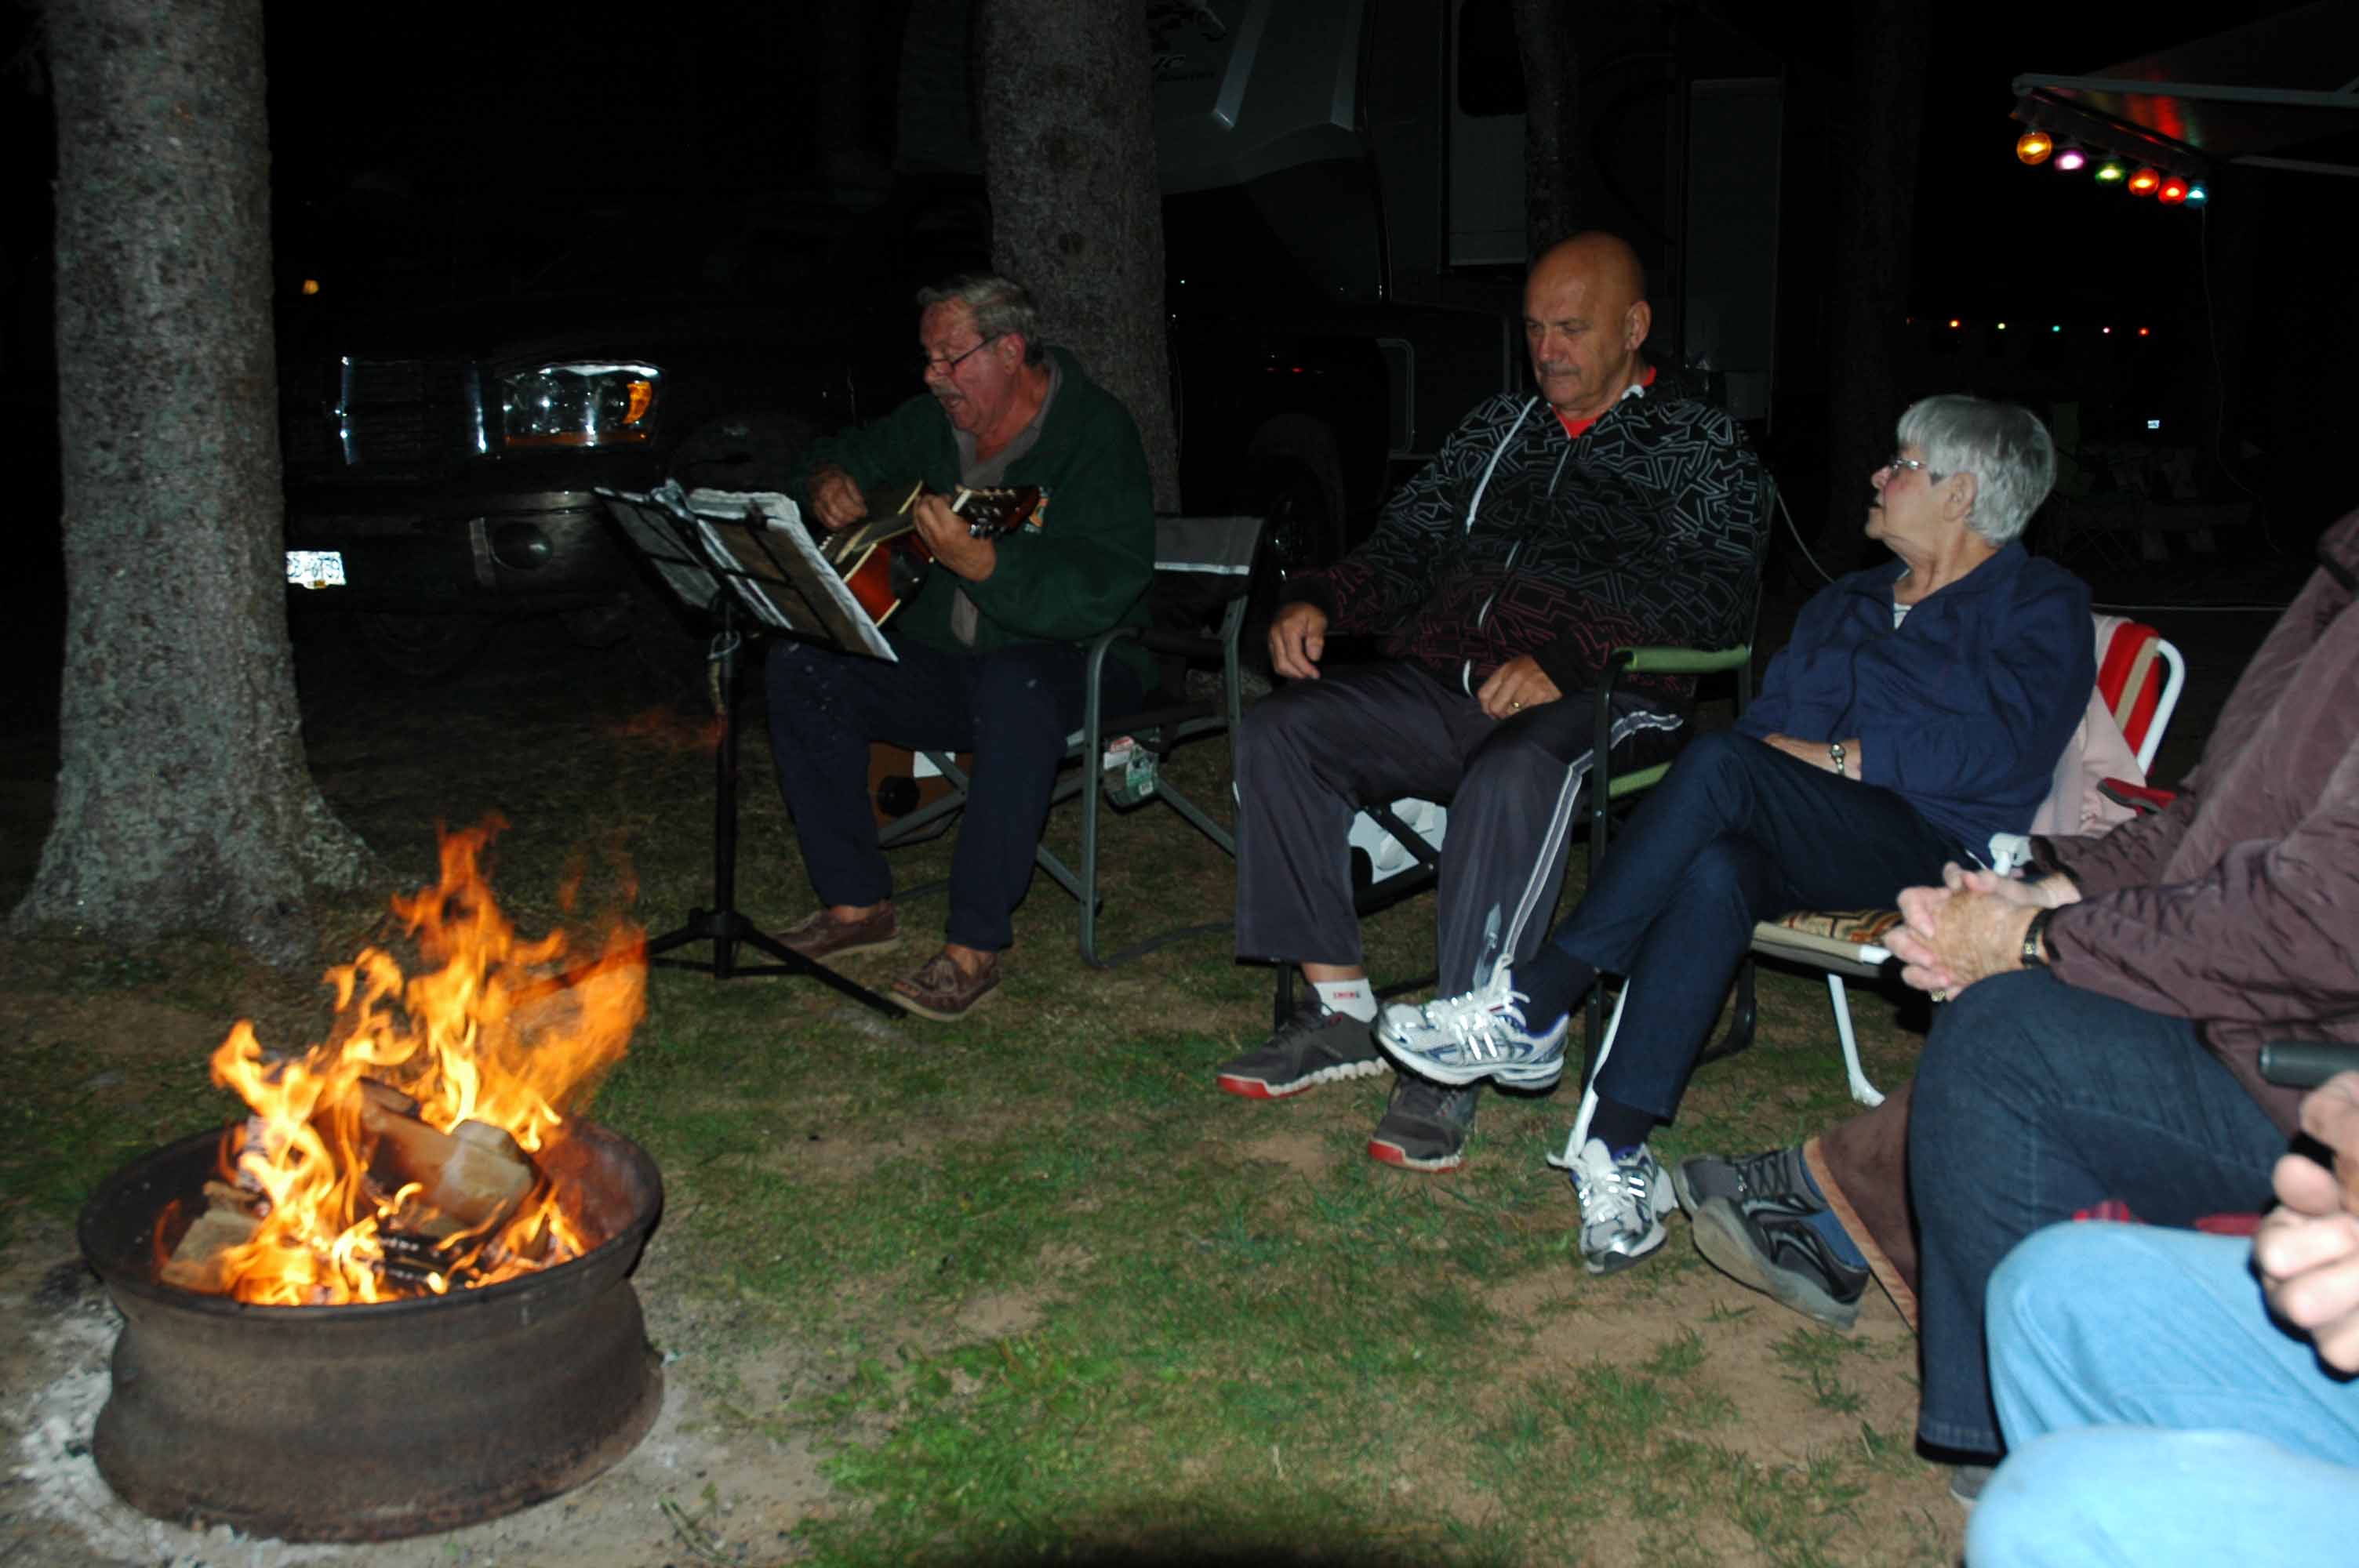 Campfire music by Gerry